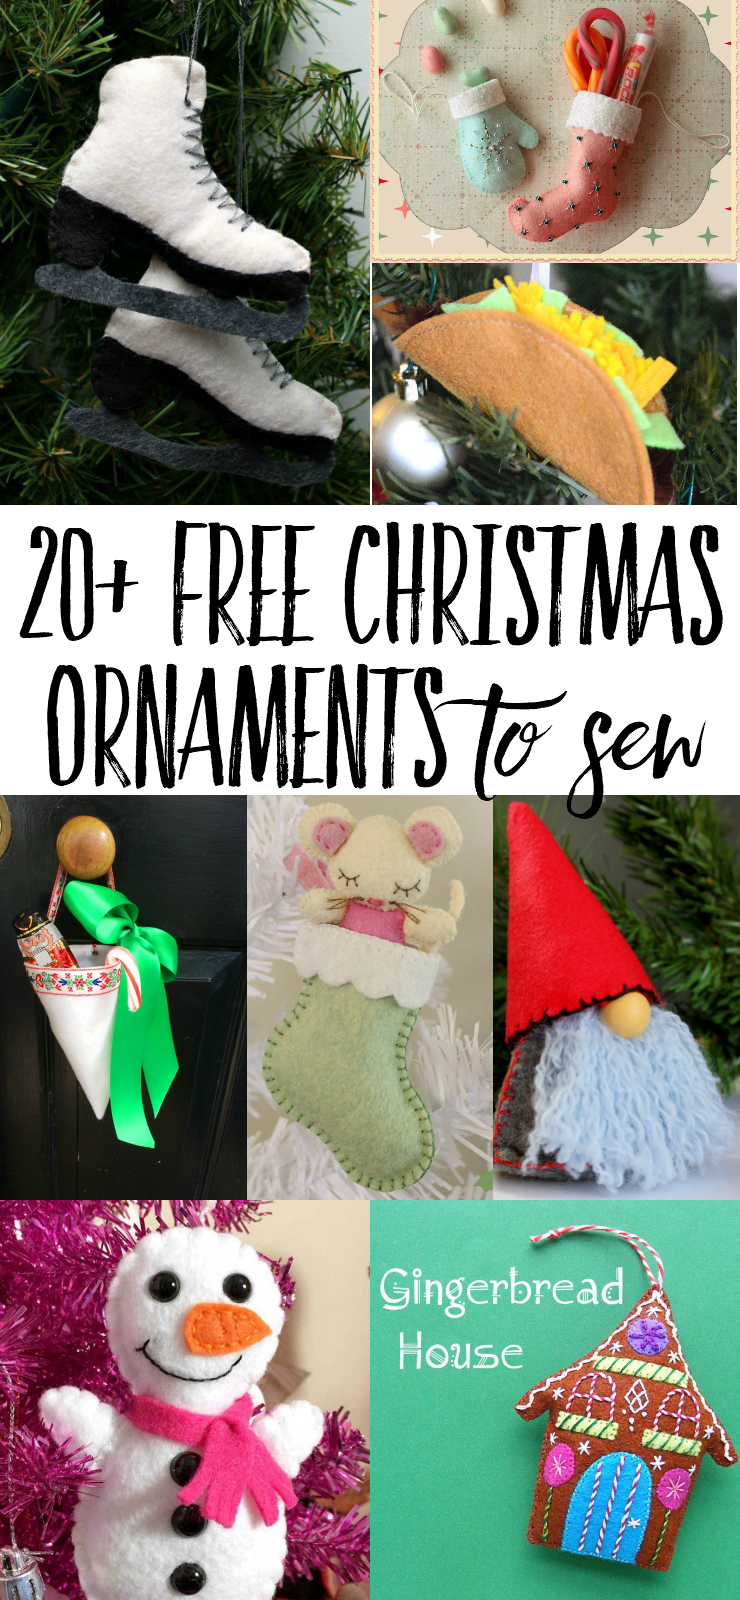 Check out this long list of free felt Christmas ornaments! Free sewing patterns and tutorials make these diy ornaments simple and fun to make, perfect for handmade Christmas gifts. #diyfeltchristmasornament